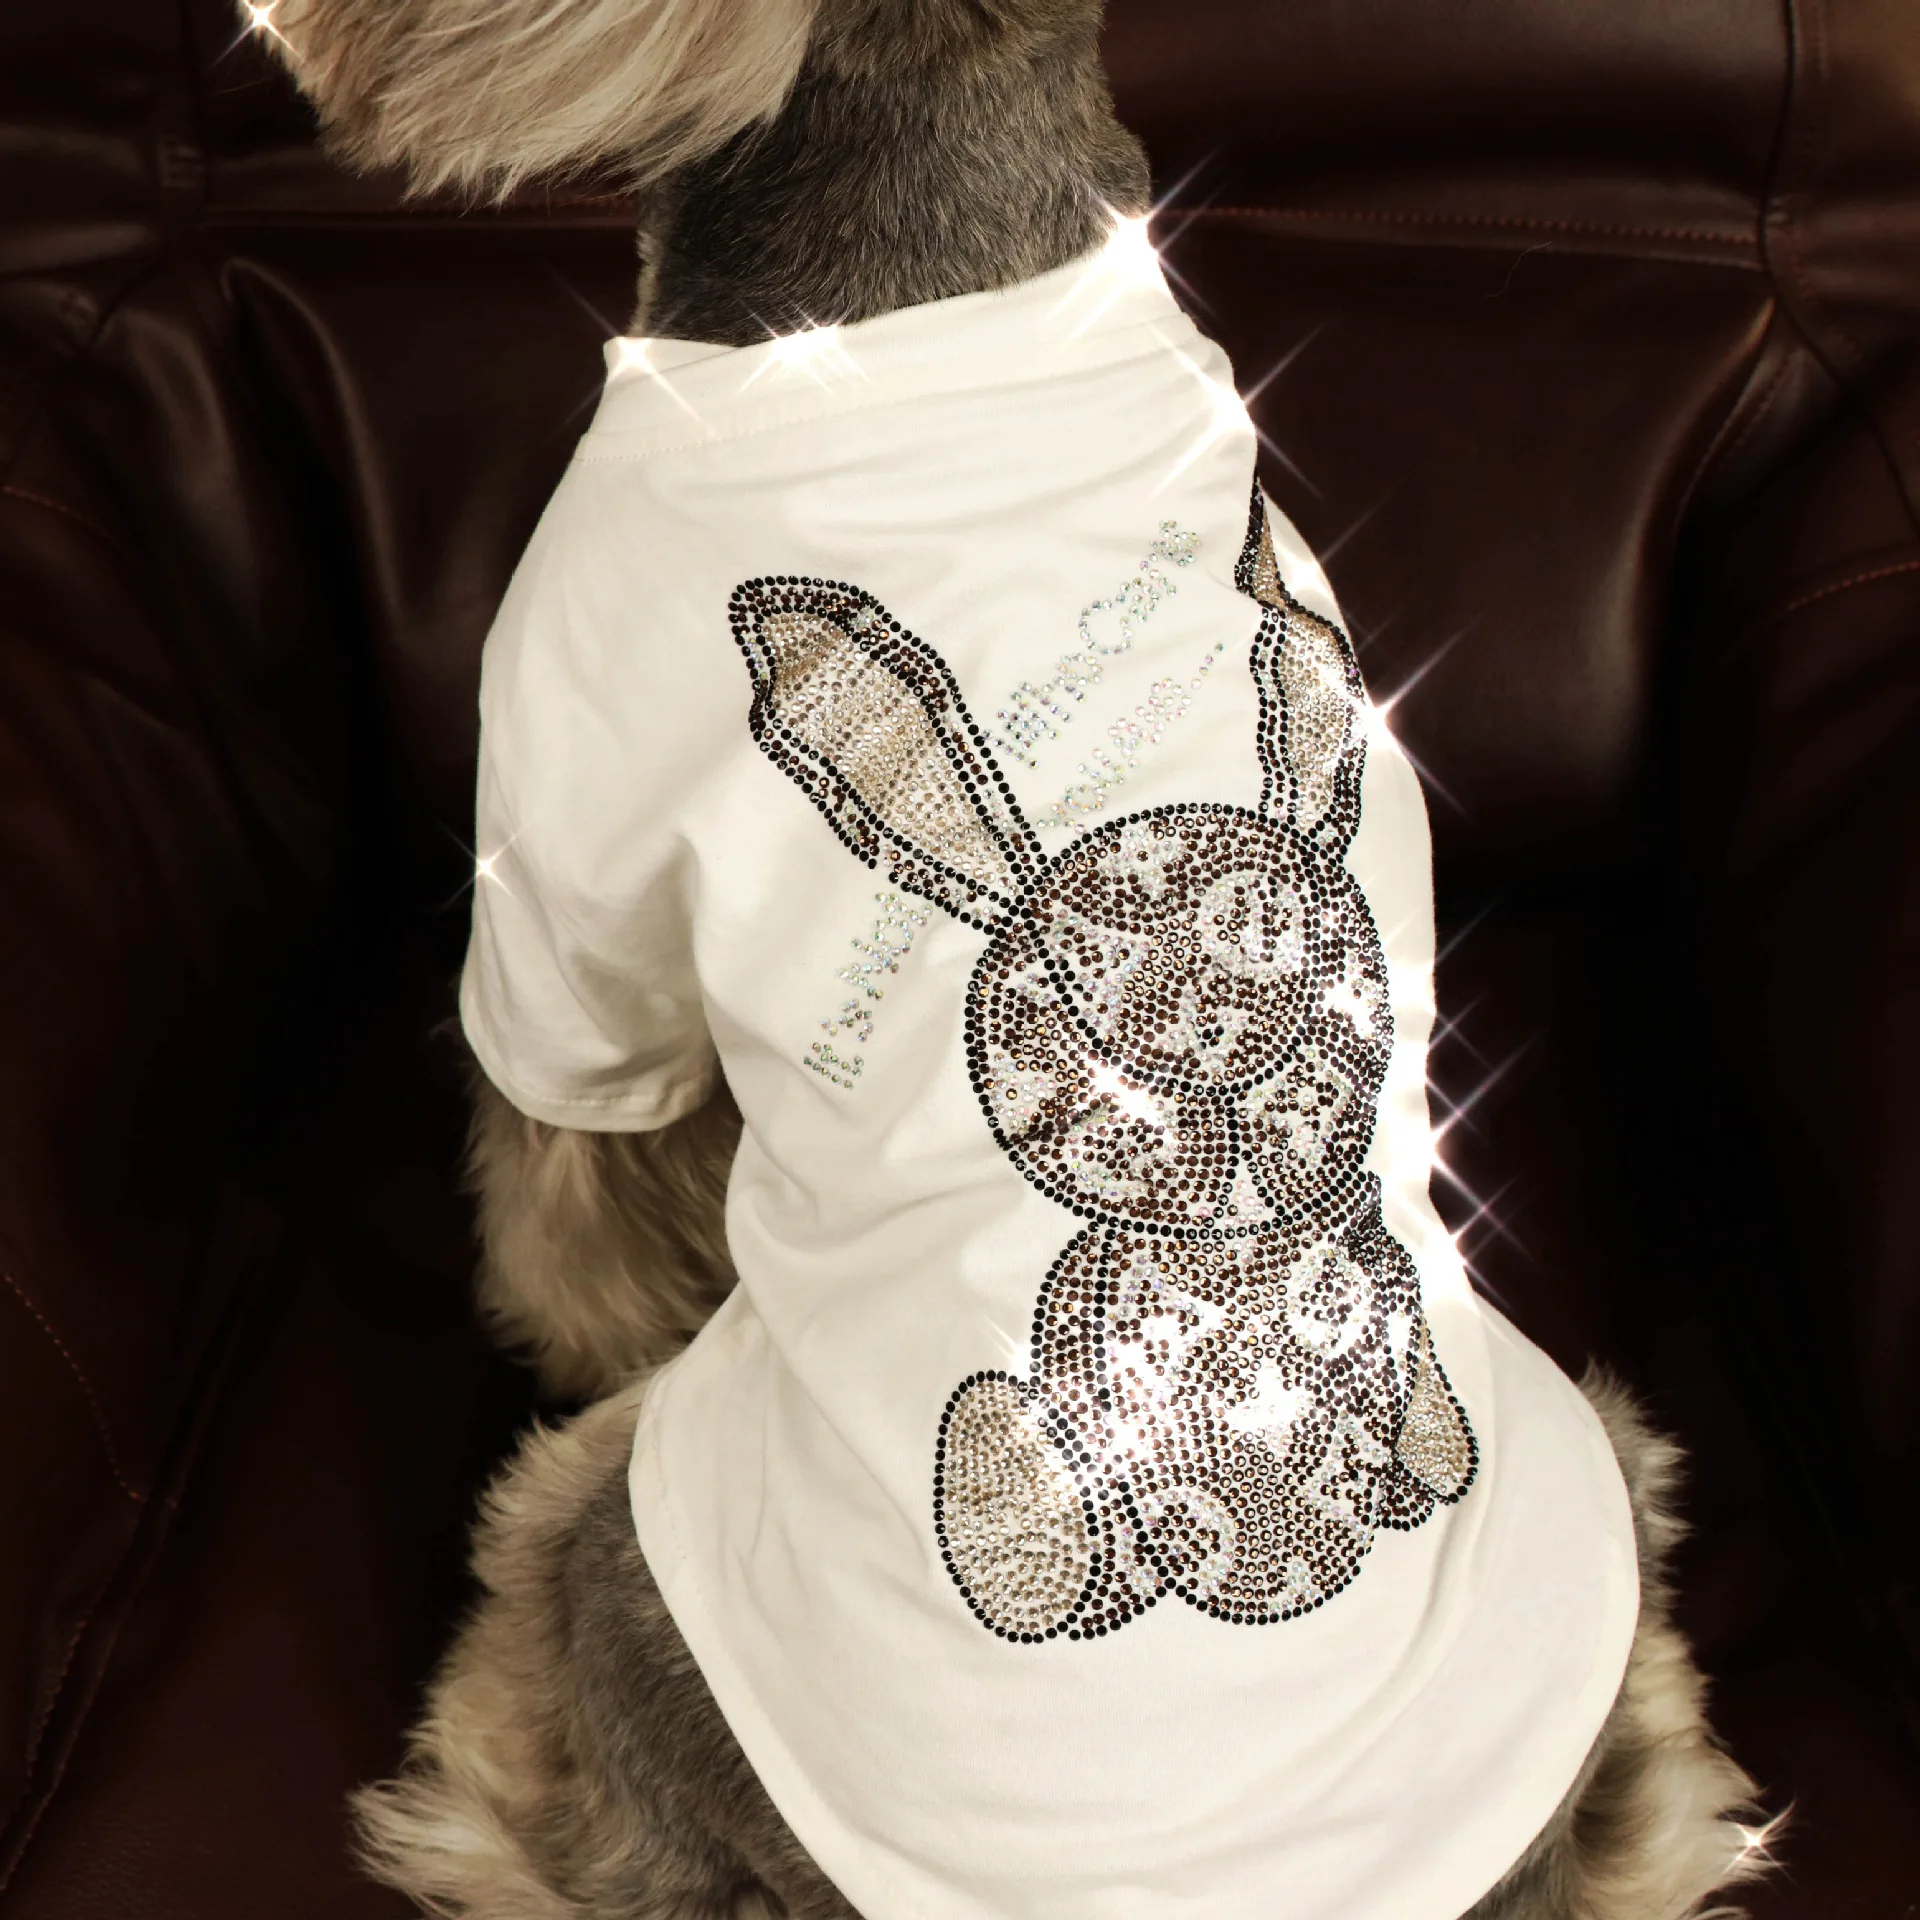 

Summer Pet Outfits Hot drill rabbit vest Dogs Shirt Comfy Go For A Stroll Pure Cotton Jackets Fashion Cool Puppy Costume